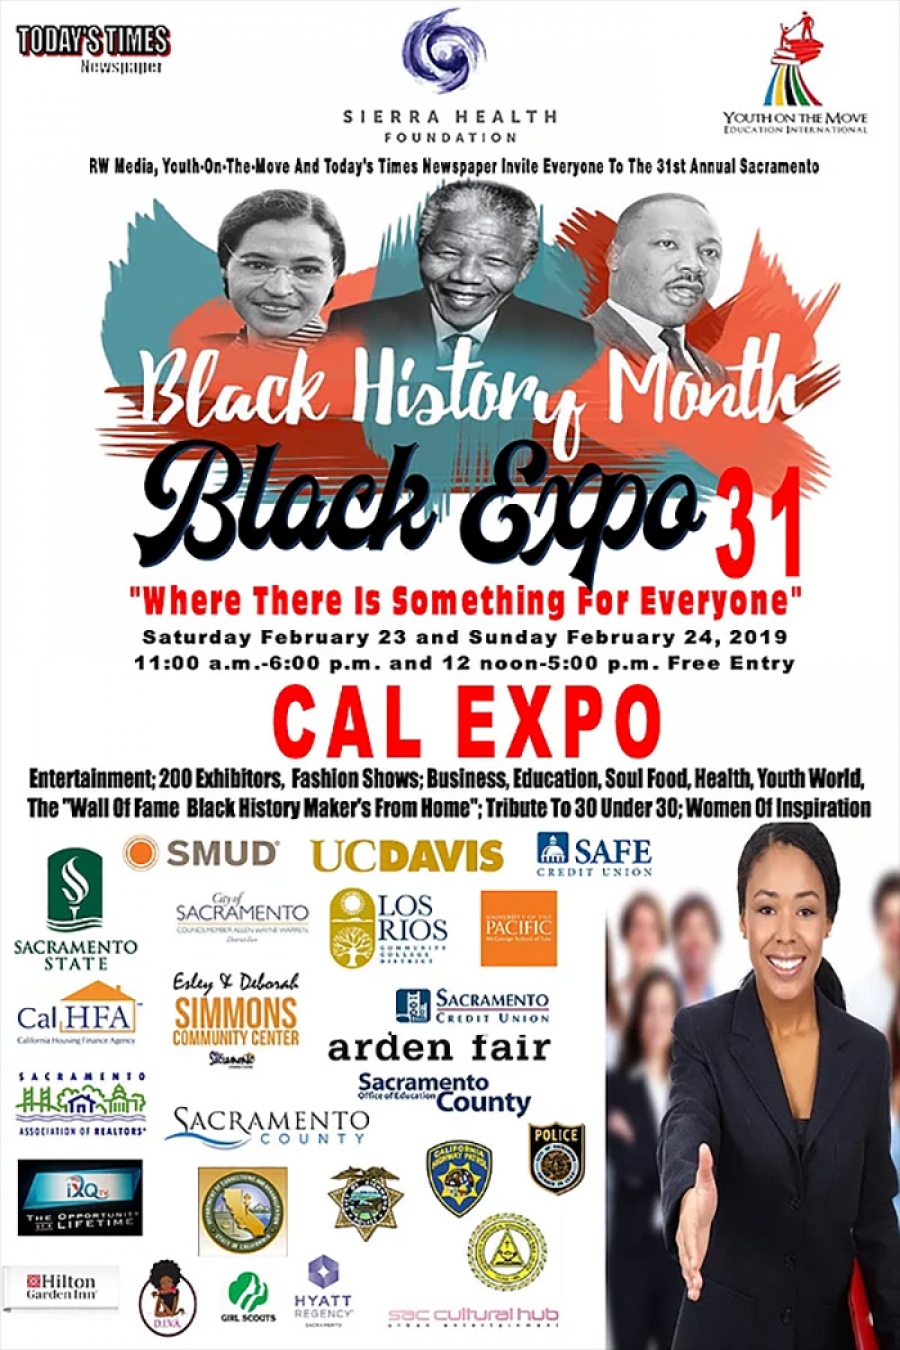 BLACK EXPO in FULL EFFECT This Weekend Feb 2324 See the Itinerary of